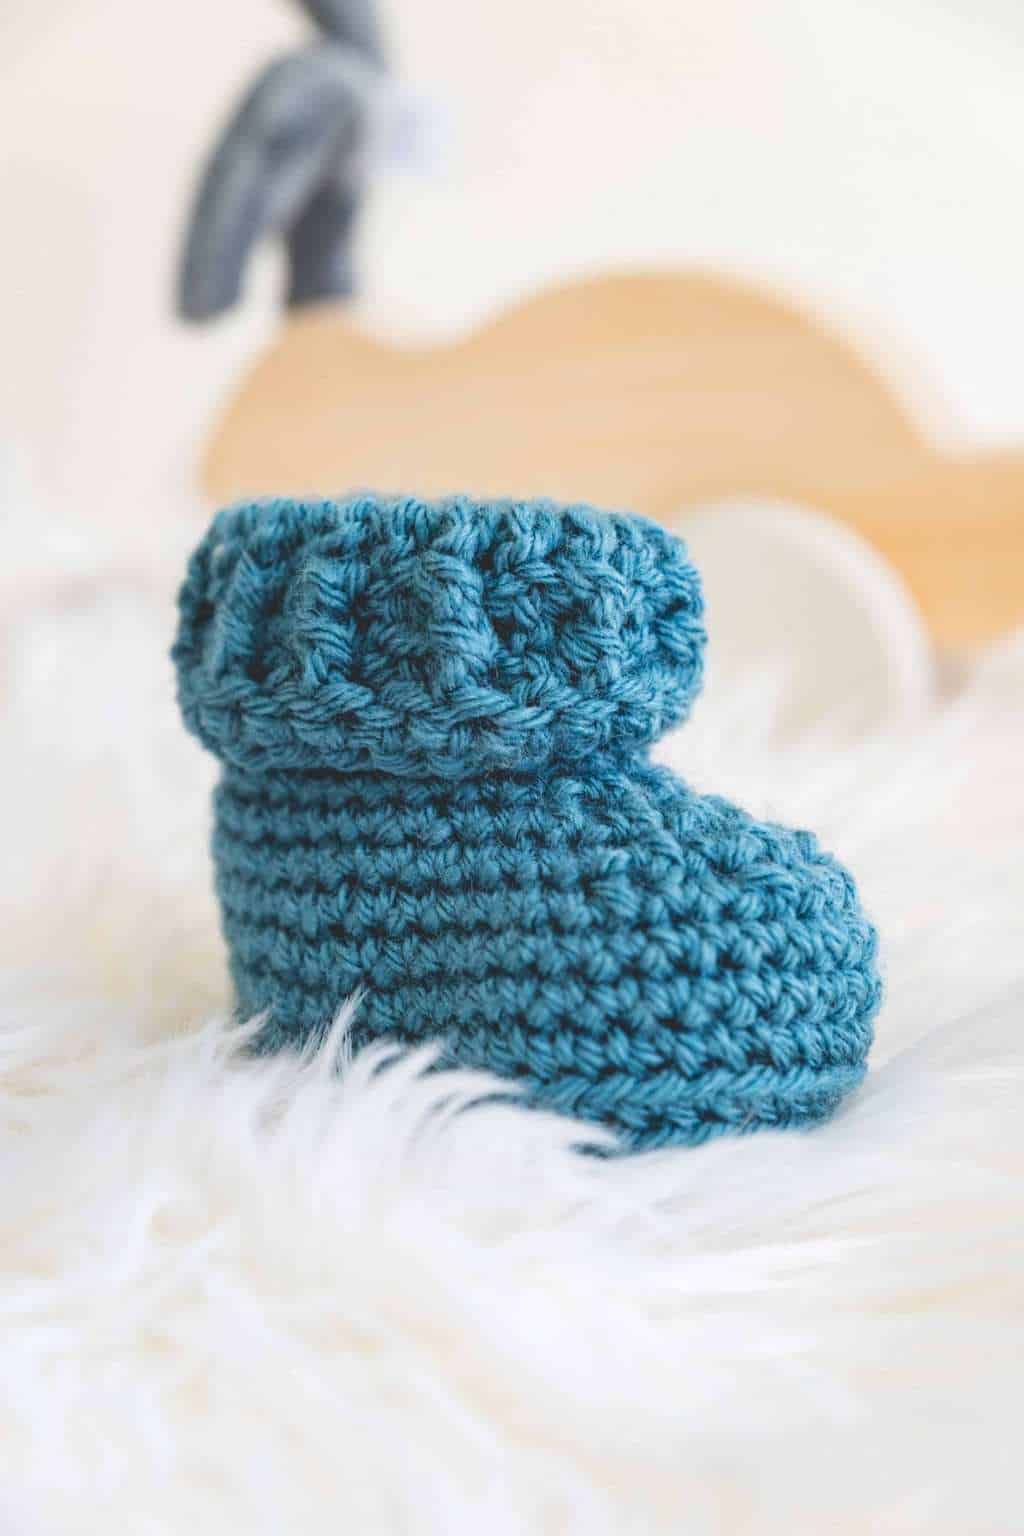 Classic Crochet Patterns For Baby Booties Easy And Free Easy Crochet Patterns